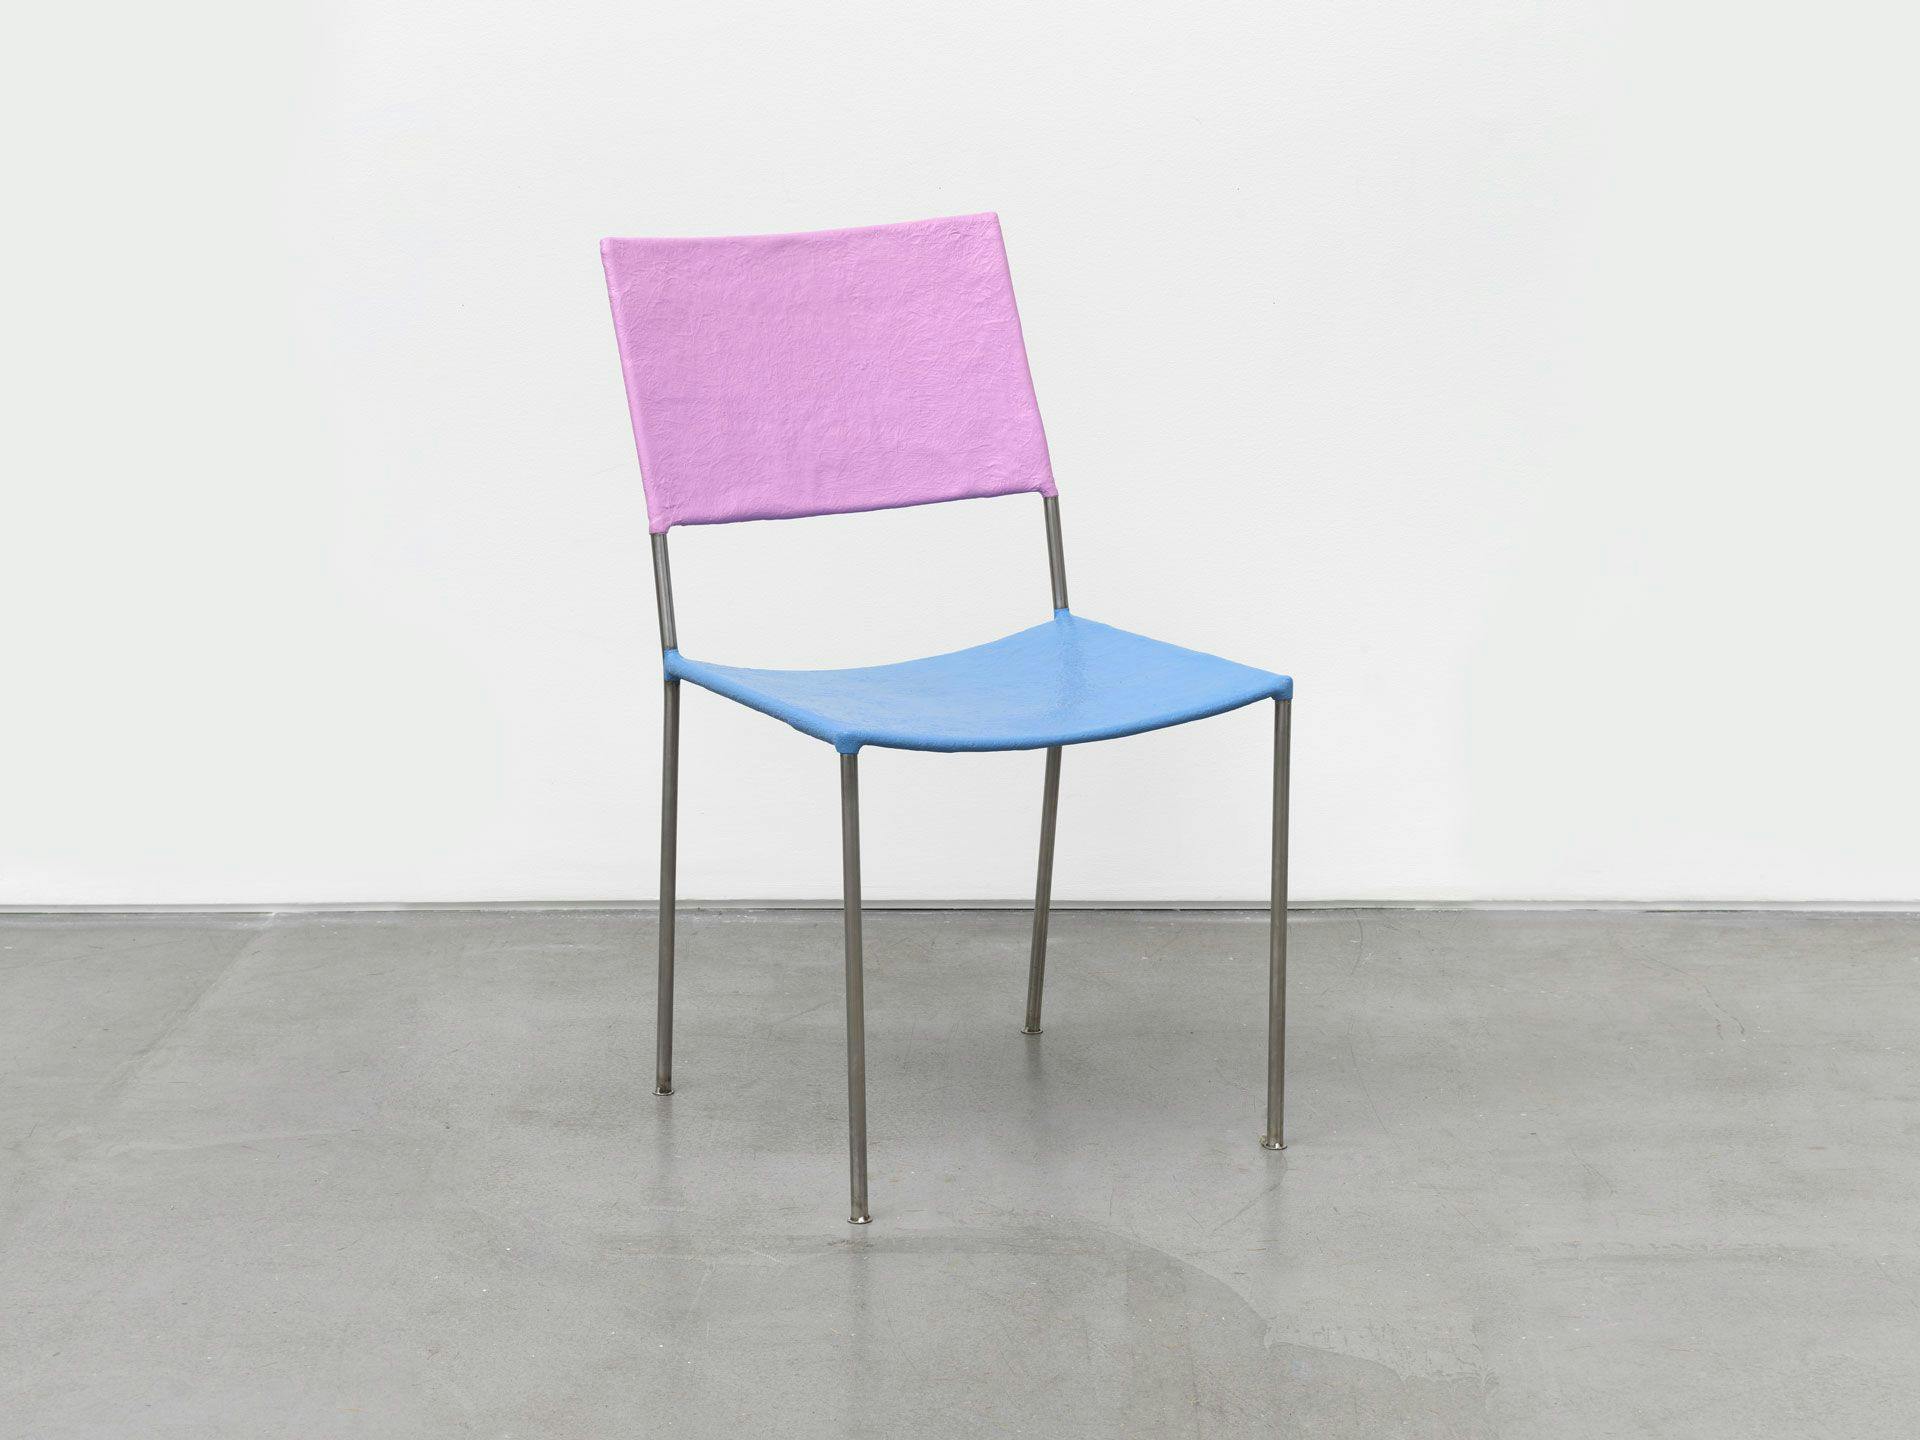 A furniture work by Franz West, titled Künstlerstuhl (Artist's Chair), dated in 2006 and 2015.